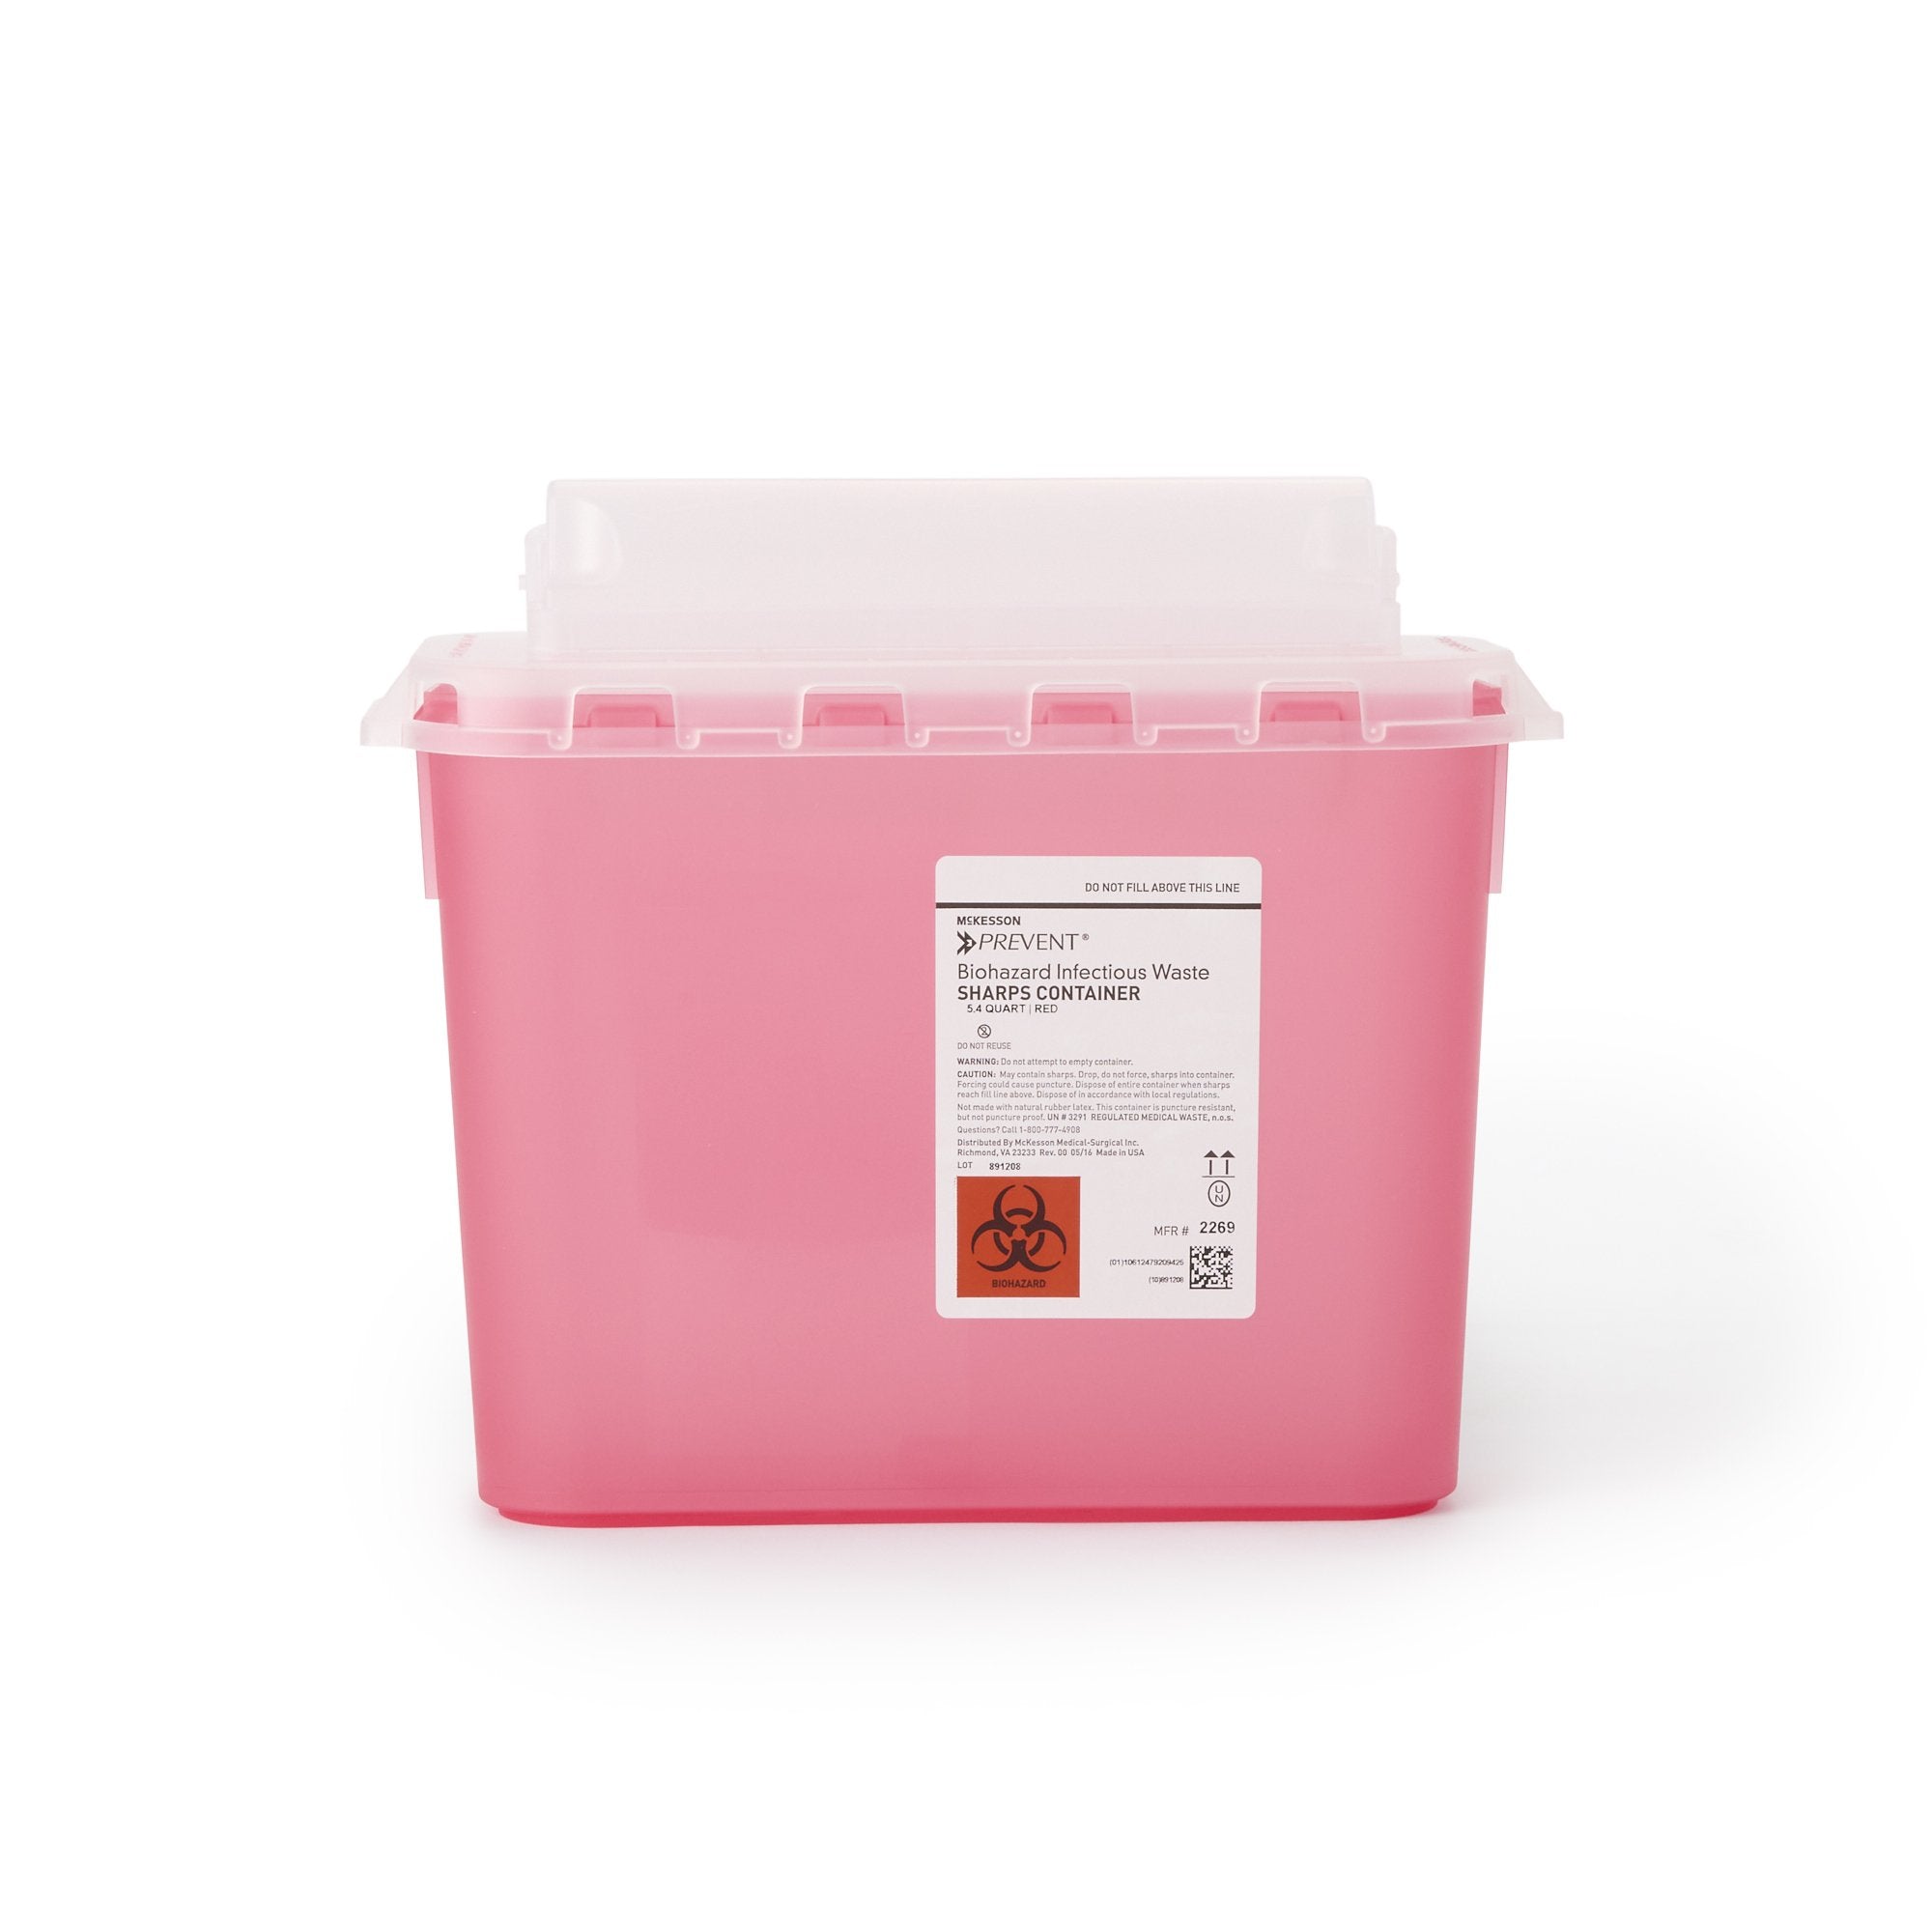 Sharps Container McKesson Prevent® Red Base 11 H X 12 W X 4-3/4 D Inch Horizontal Entry 1.35 Gallon